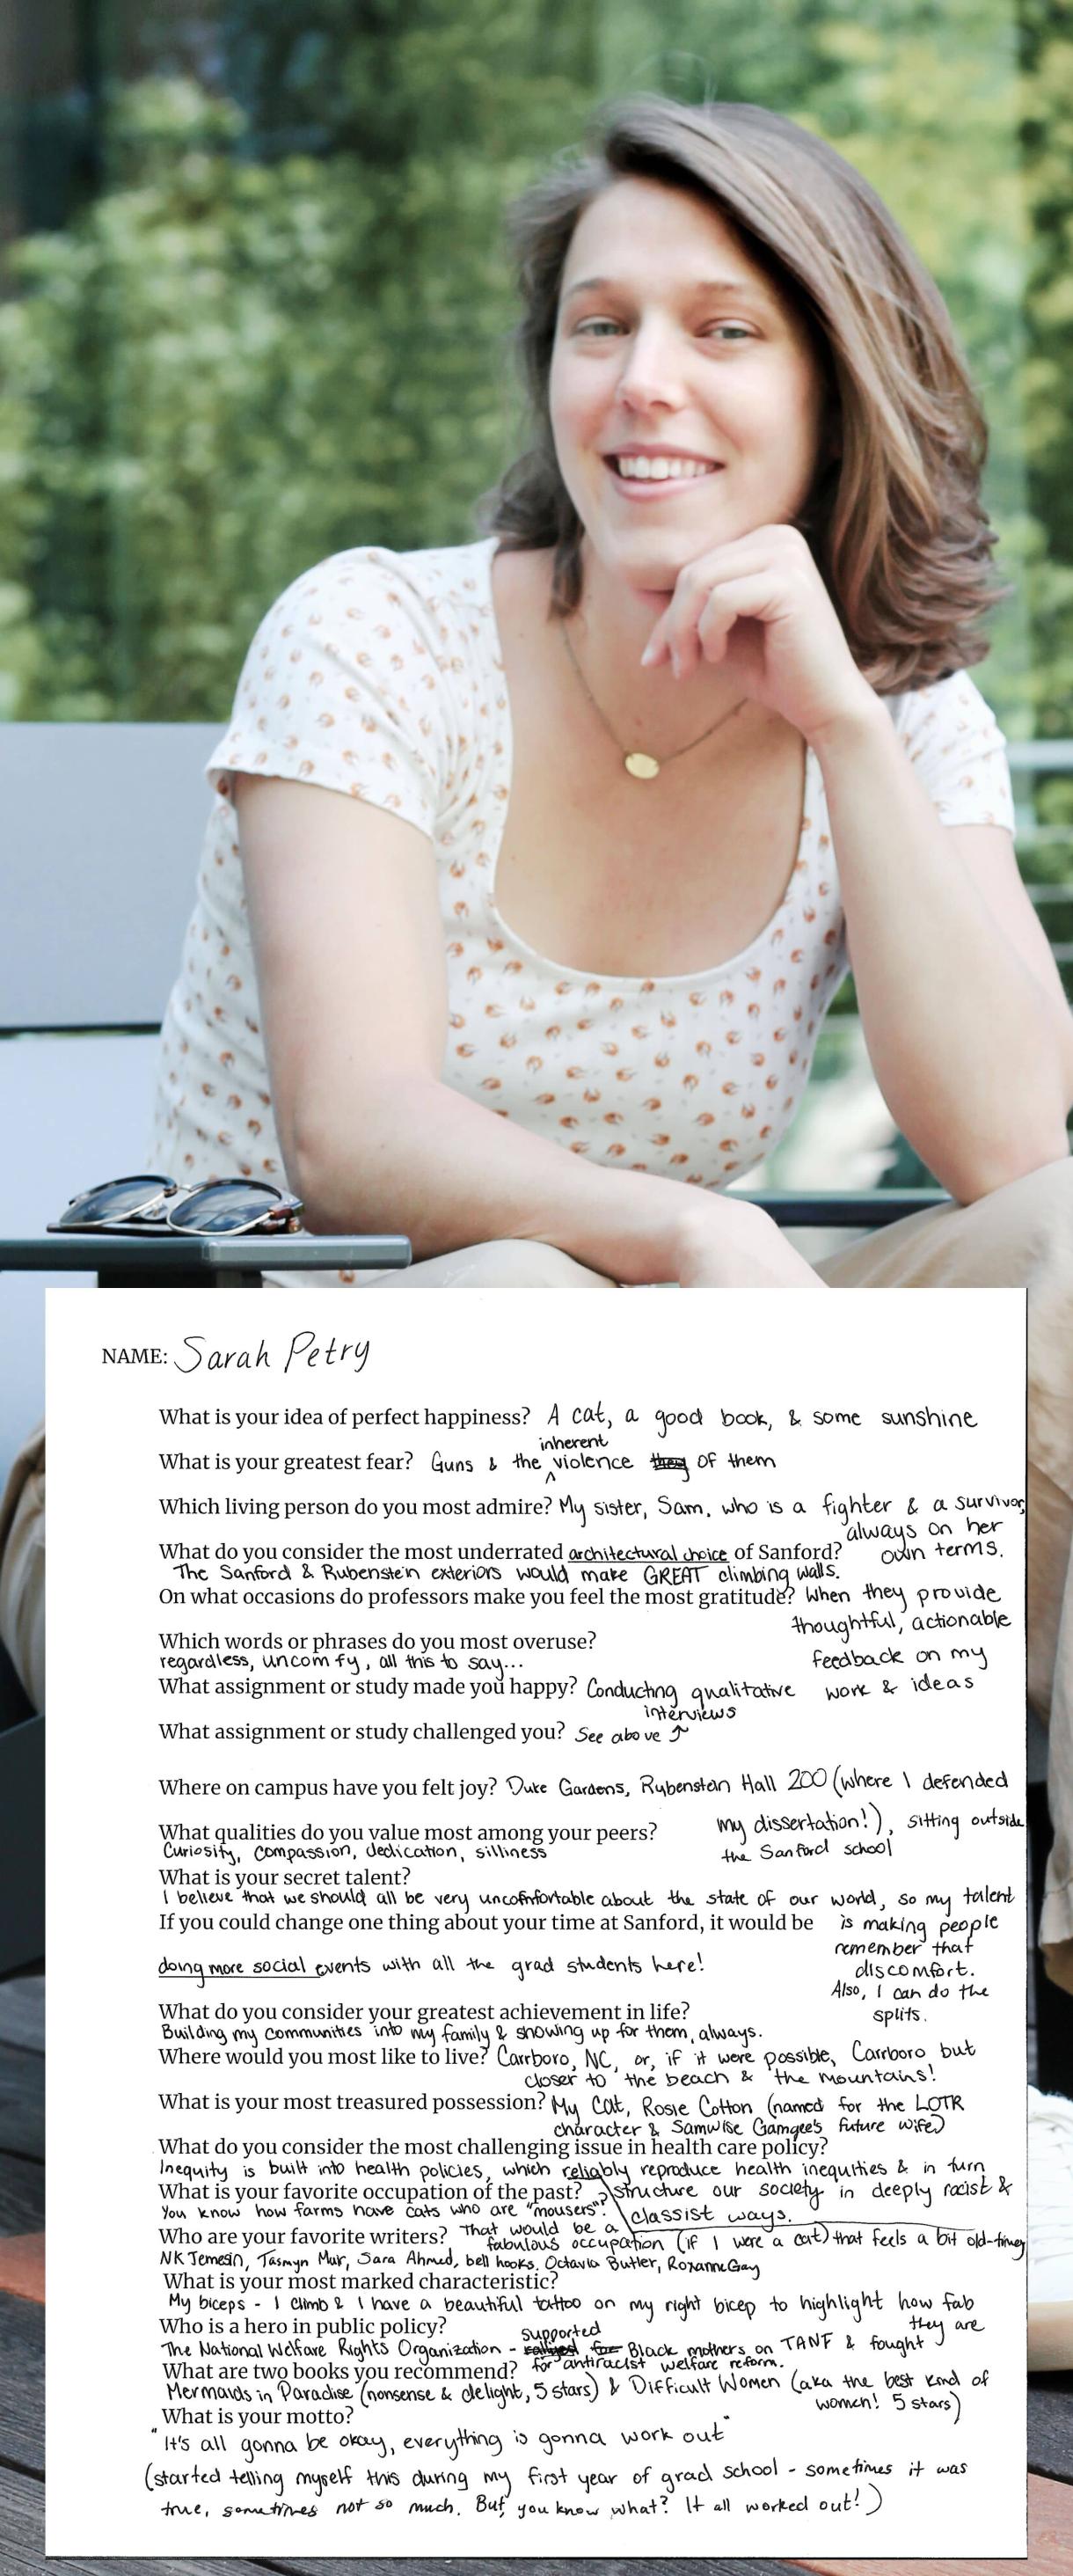 Sarah smiling, questionnaire with her handwriting